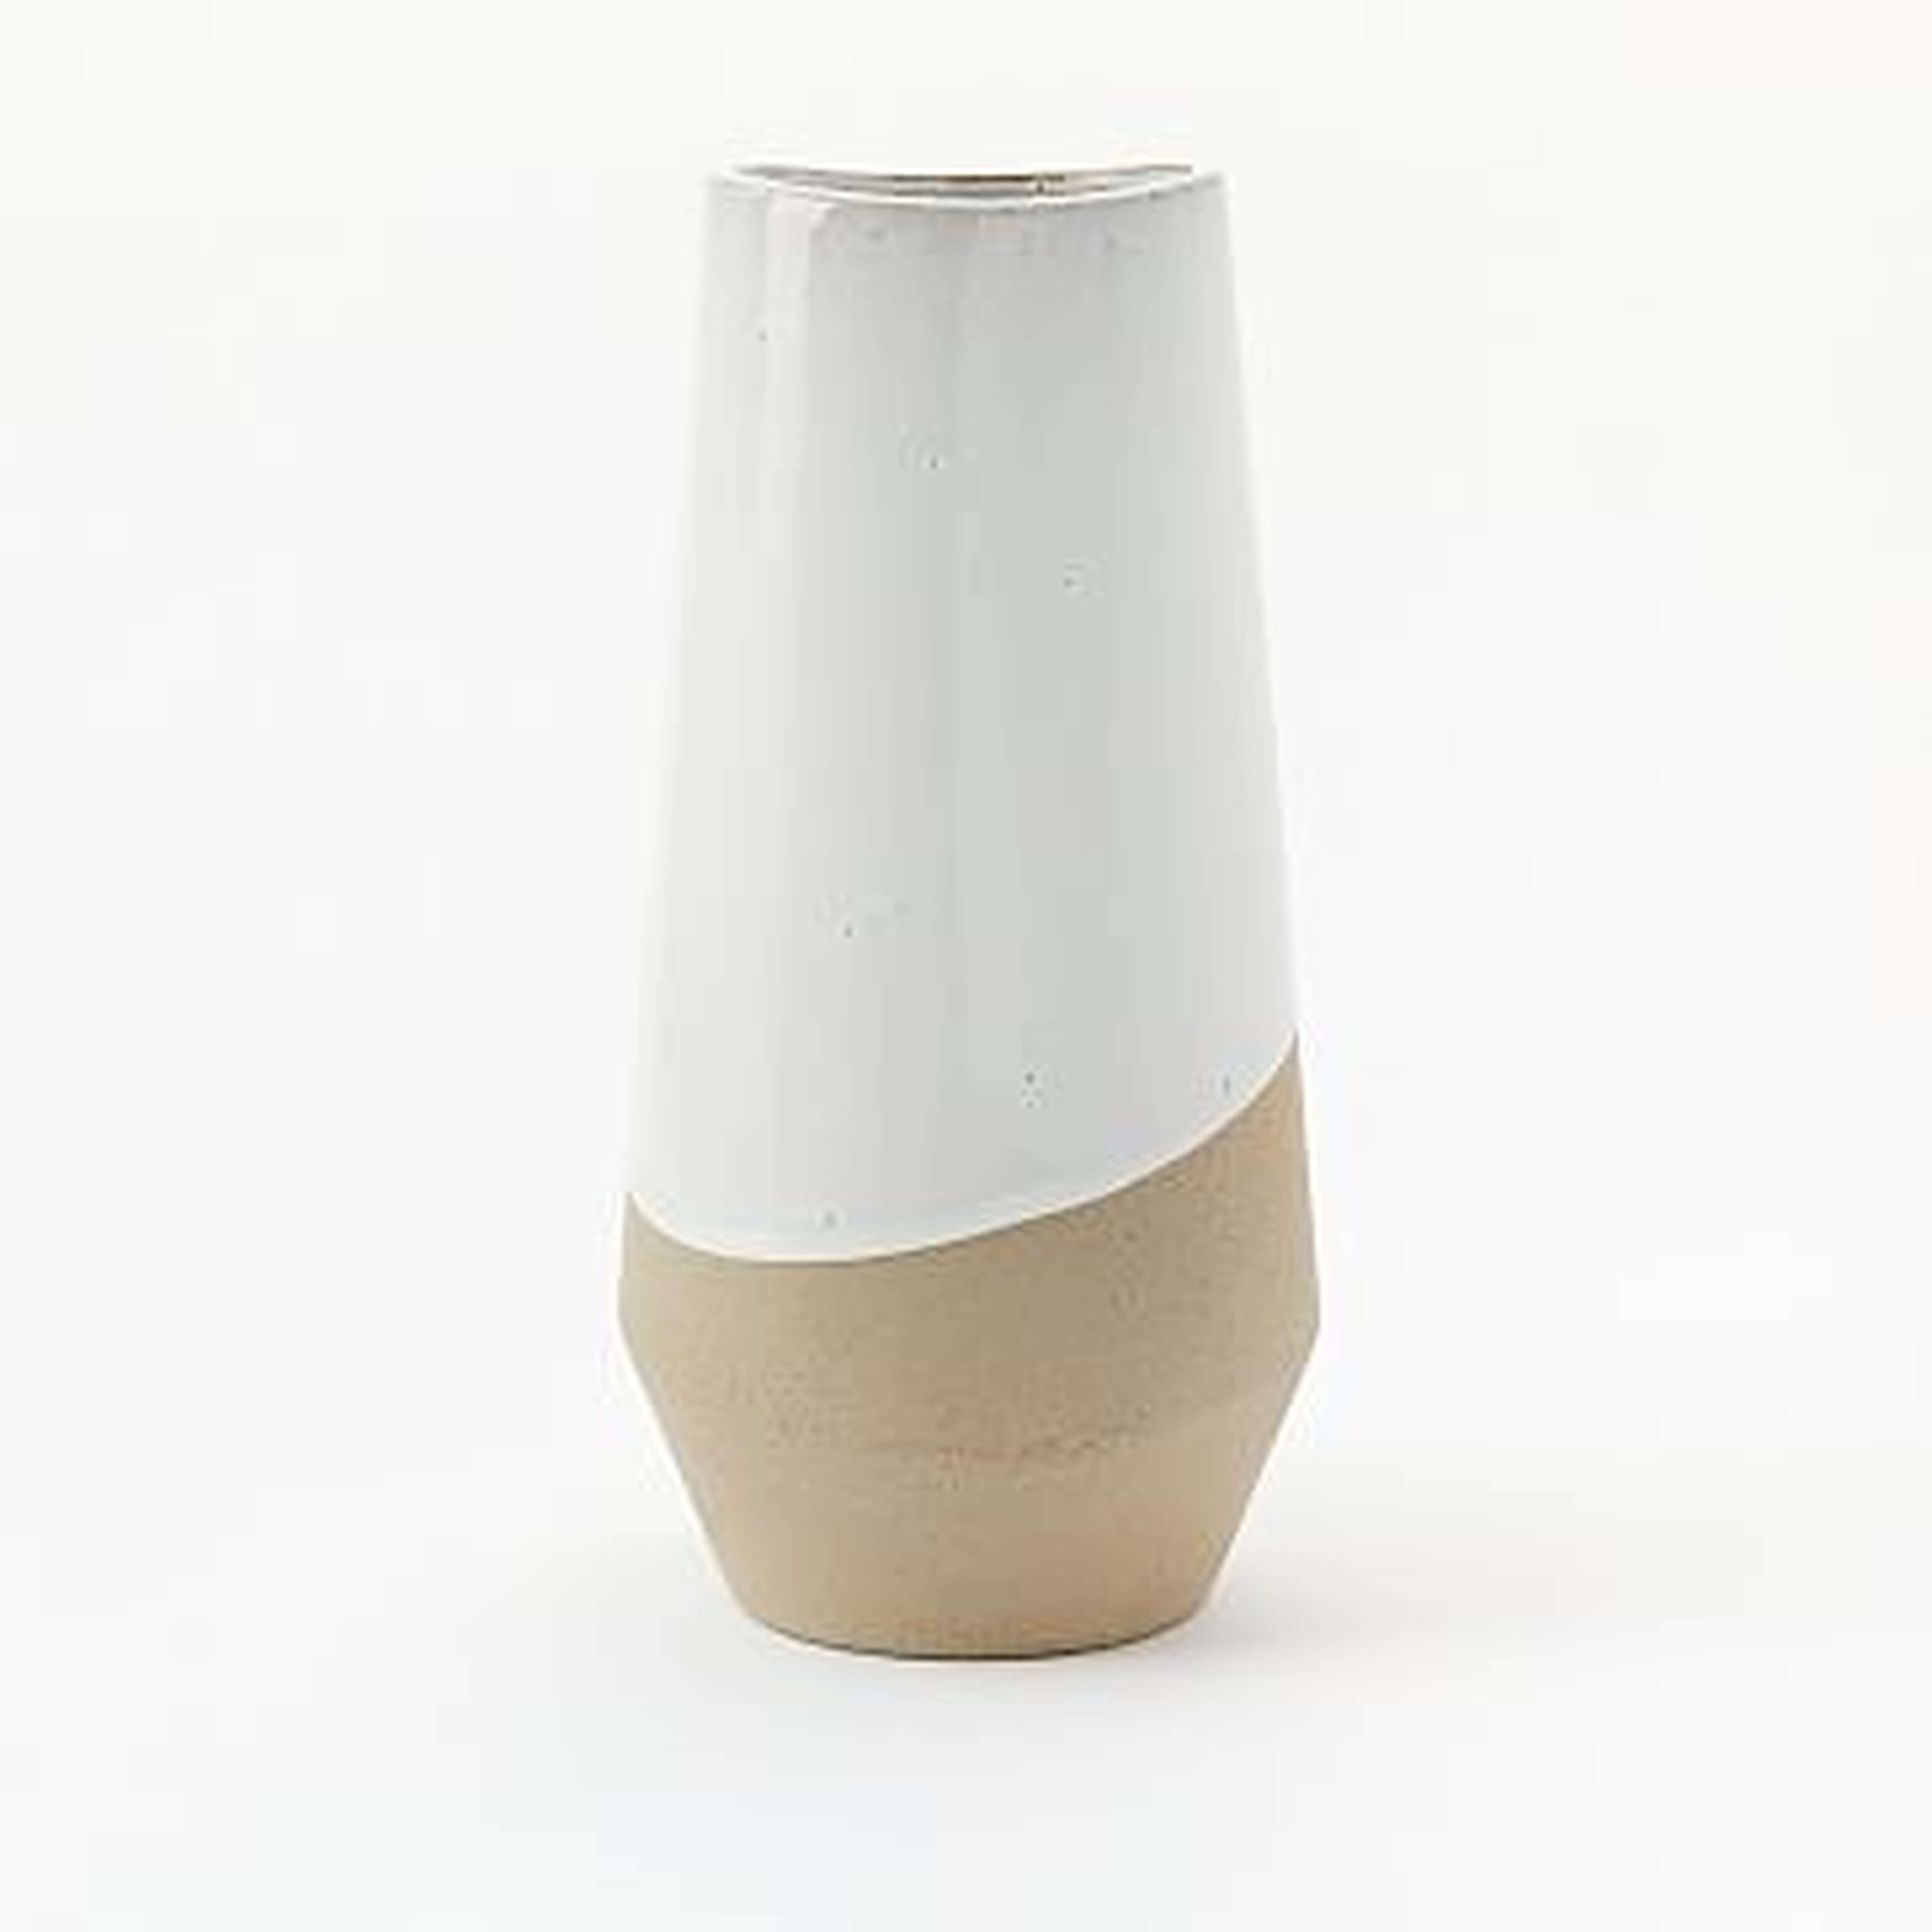 Half-Dipped Stoneware Vase, Gray & White, Tall Tapered, 13.5" - West Elm